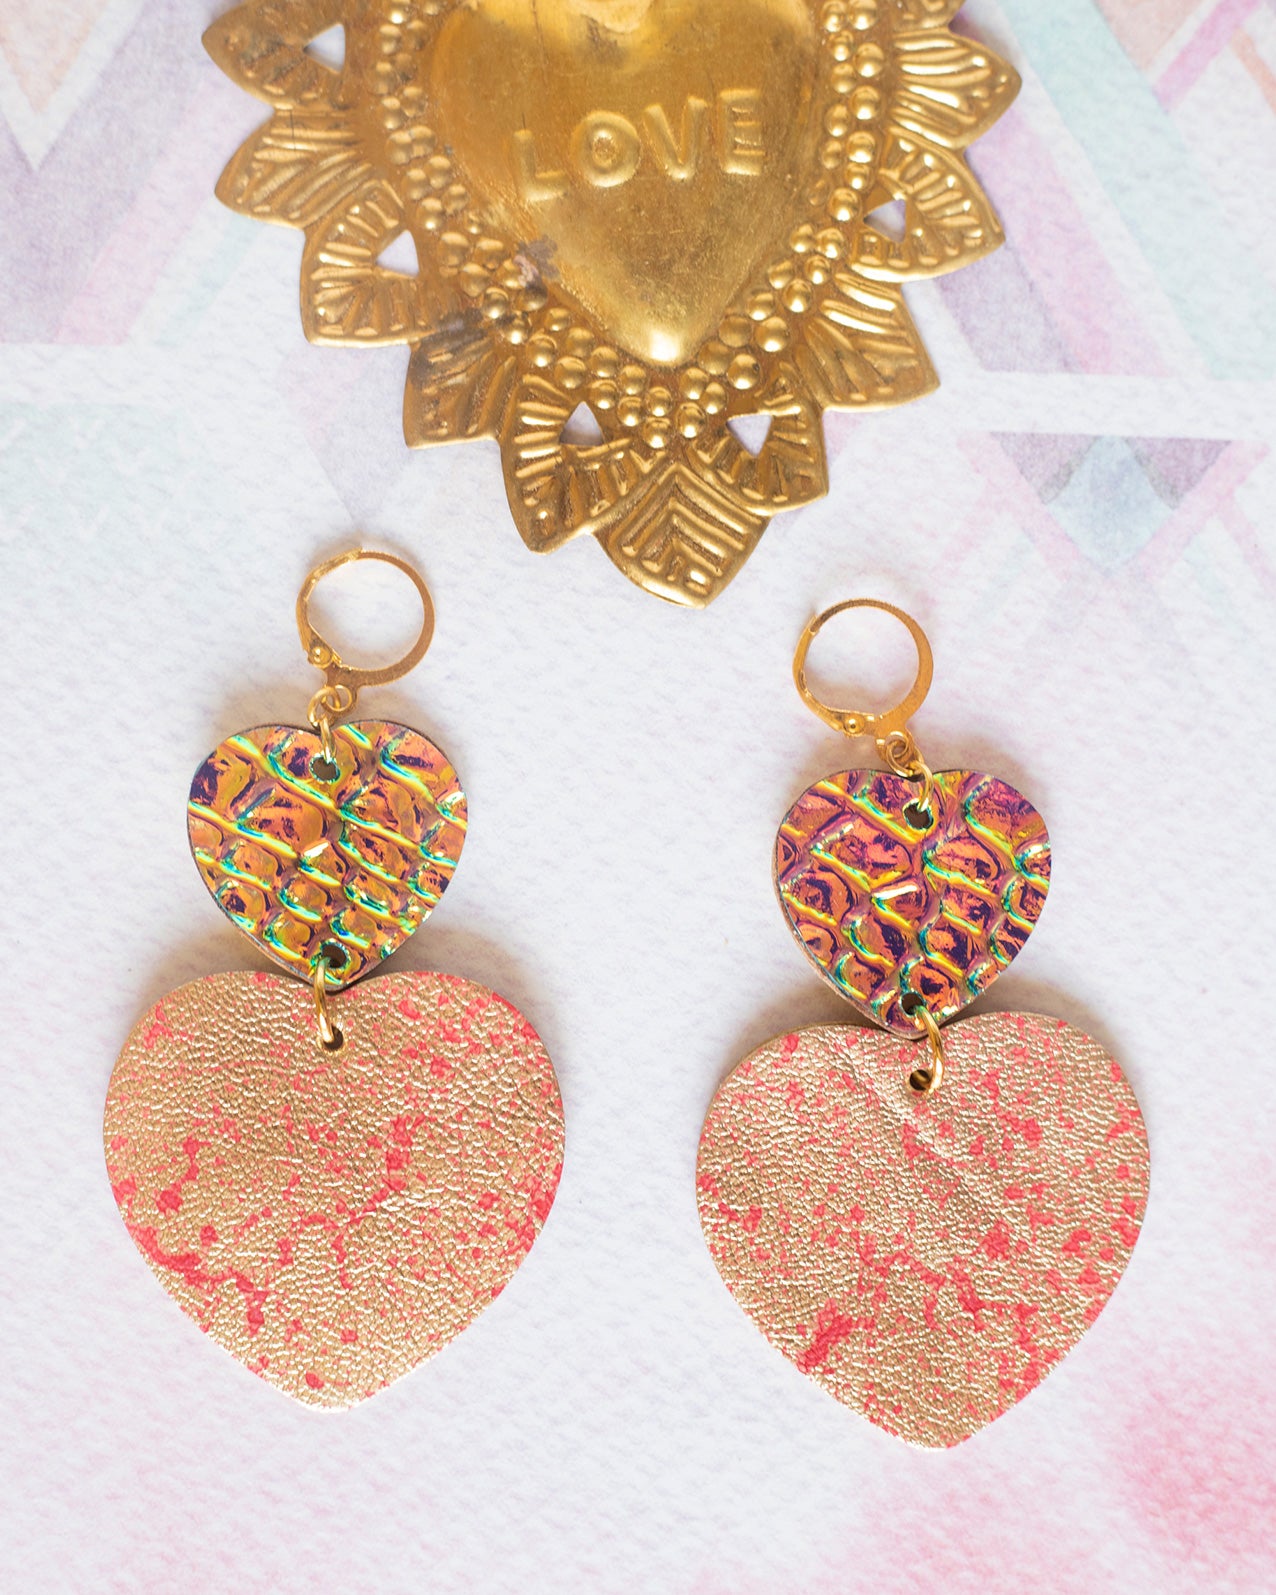 Double Hearts earrings - holographic leather and metallic coral pink